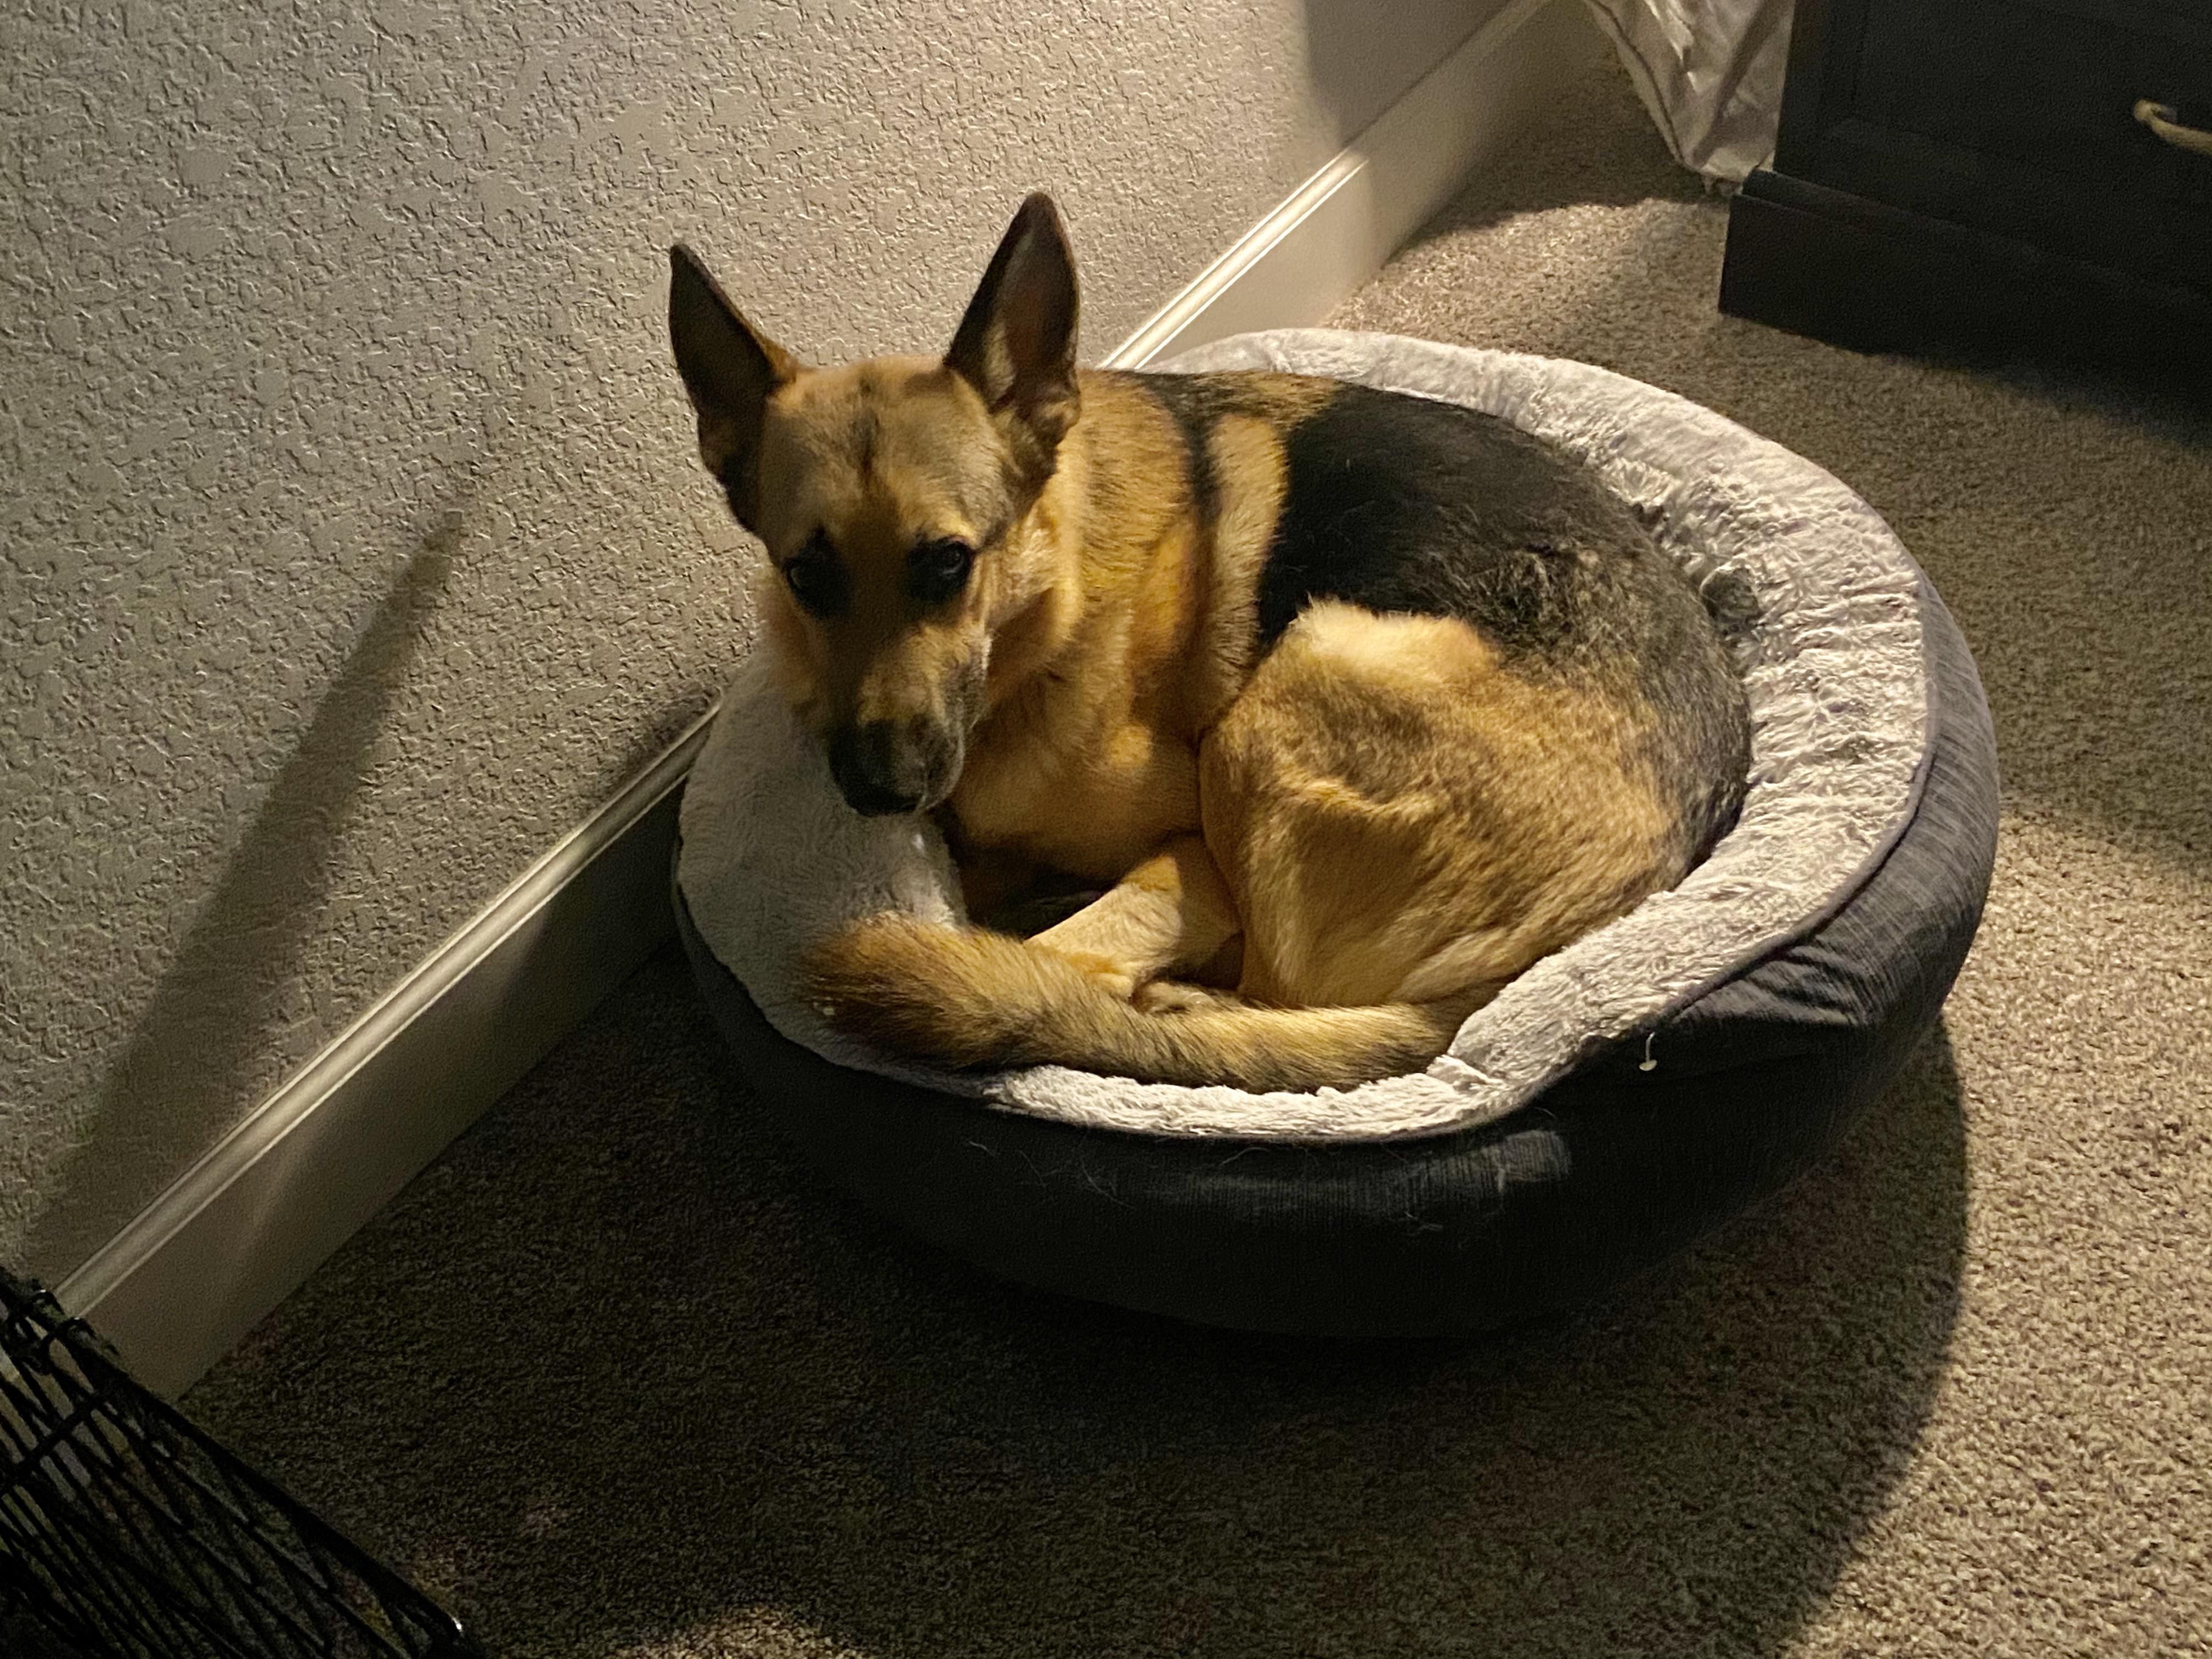 Bought a new bed for my medium size dog. This is not my medium sized dog.